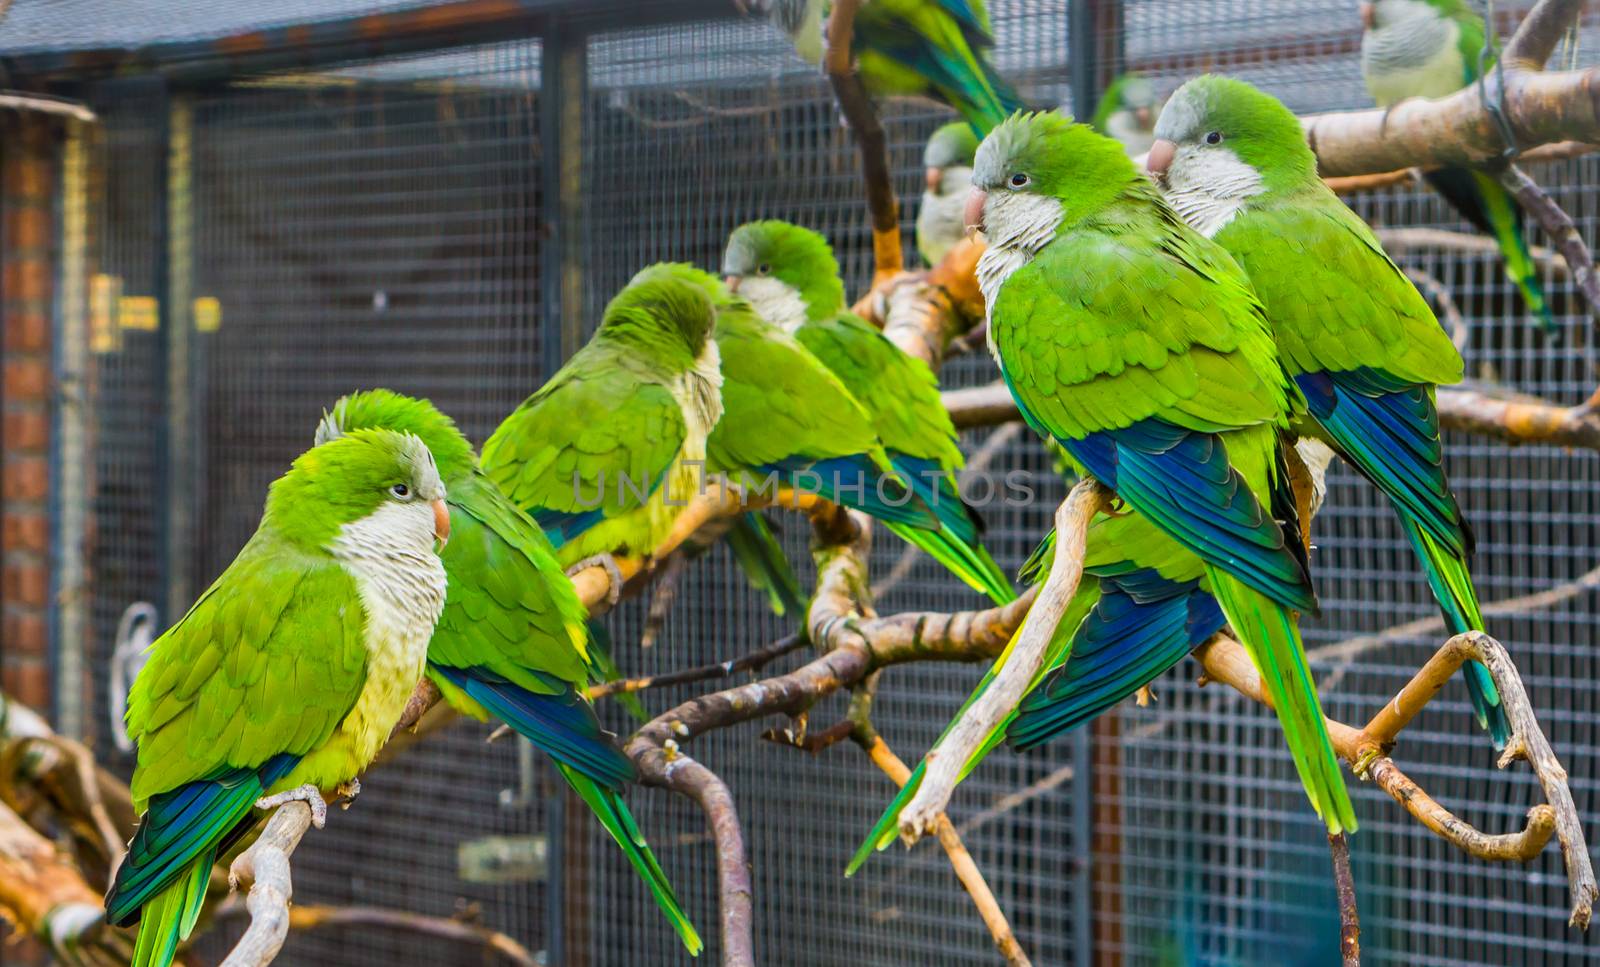 many monk parakeets sitting together on branches in the aviary, popular pets in aviculture, tropical birds from Argentina by charlottebleijenberg